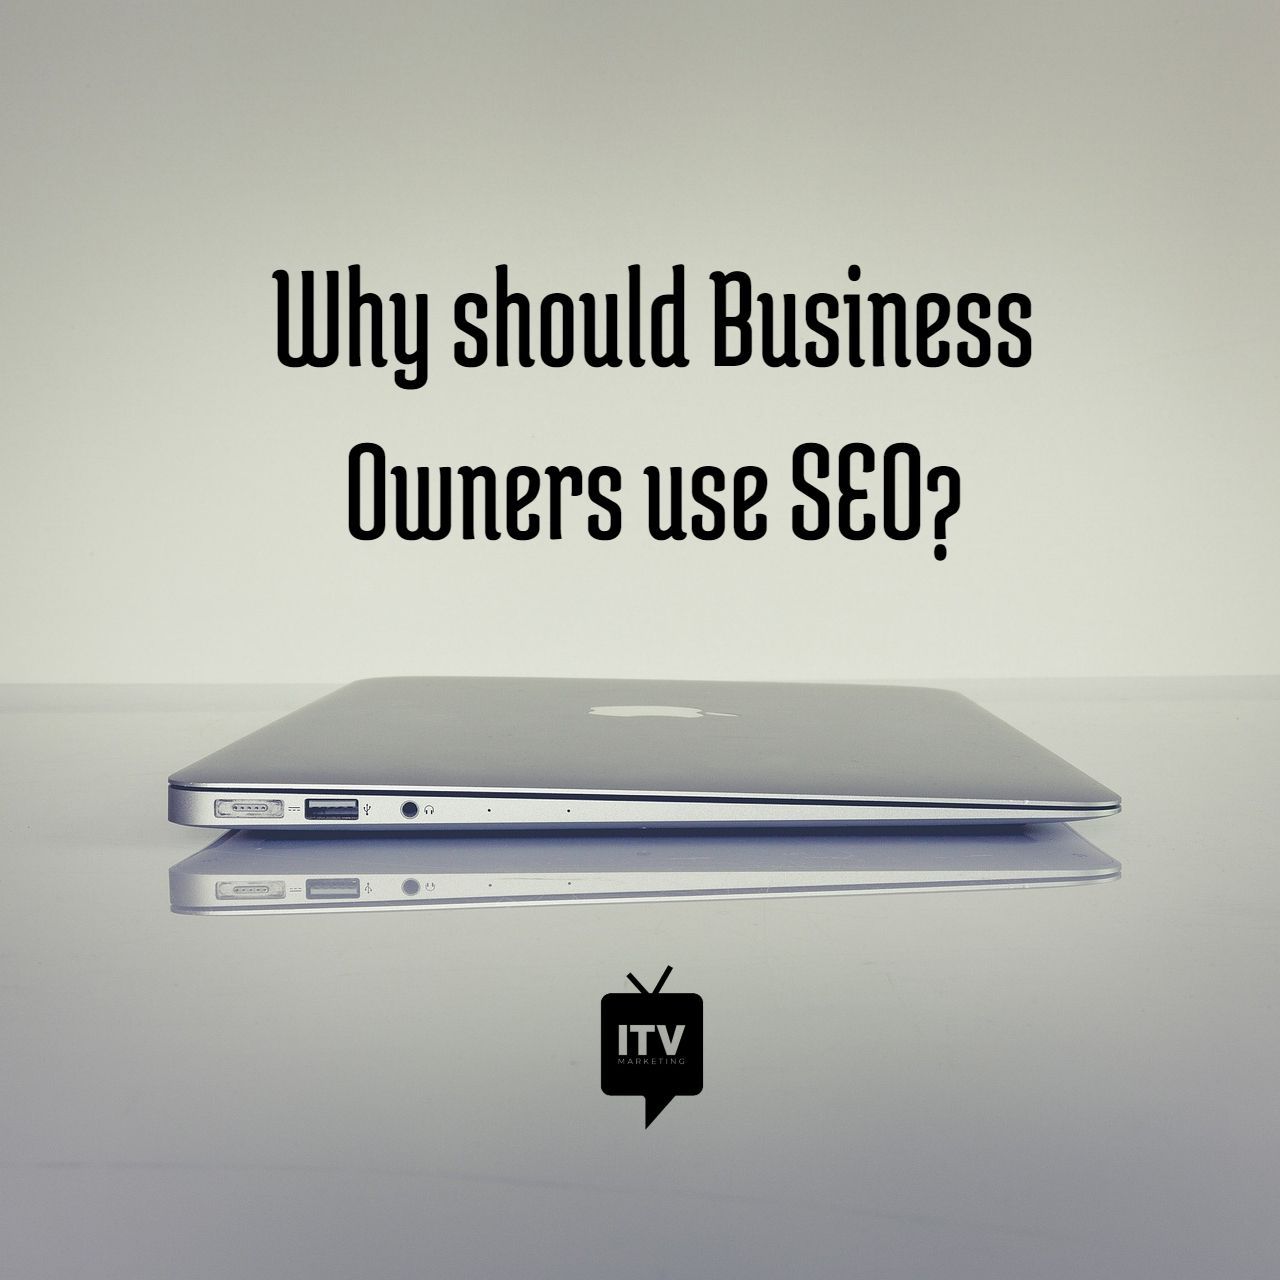 Why should Business Owners use SEO?